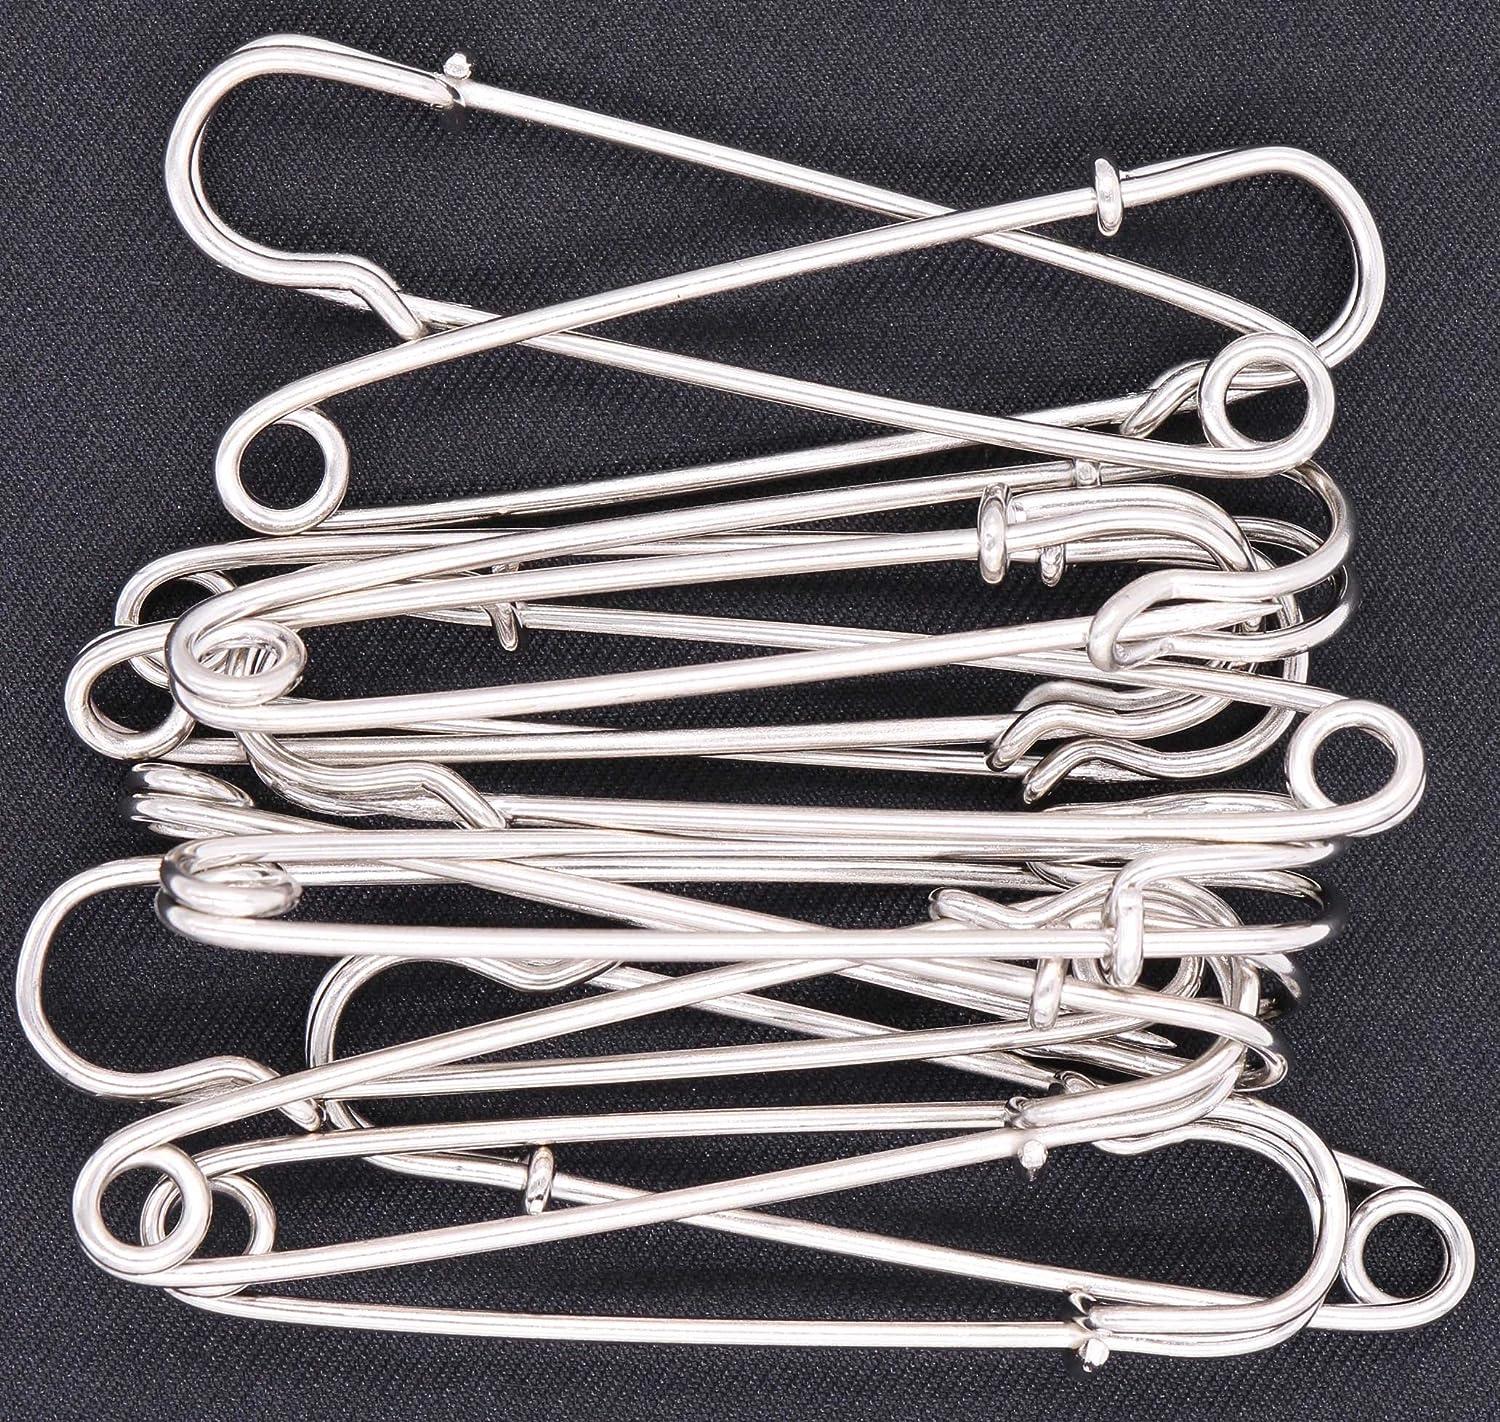  Safety Pins Large Heavy Duty Safety Pin - LeBeila